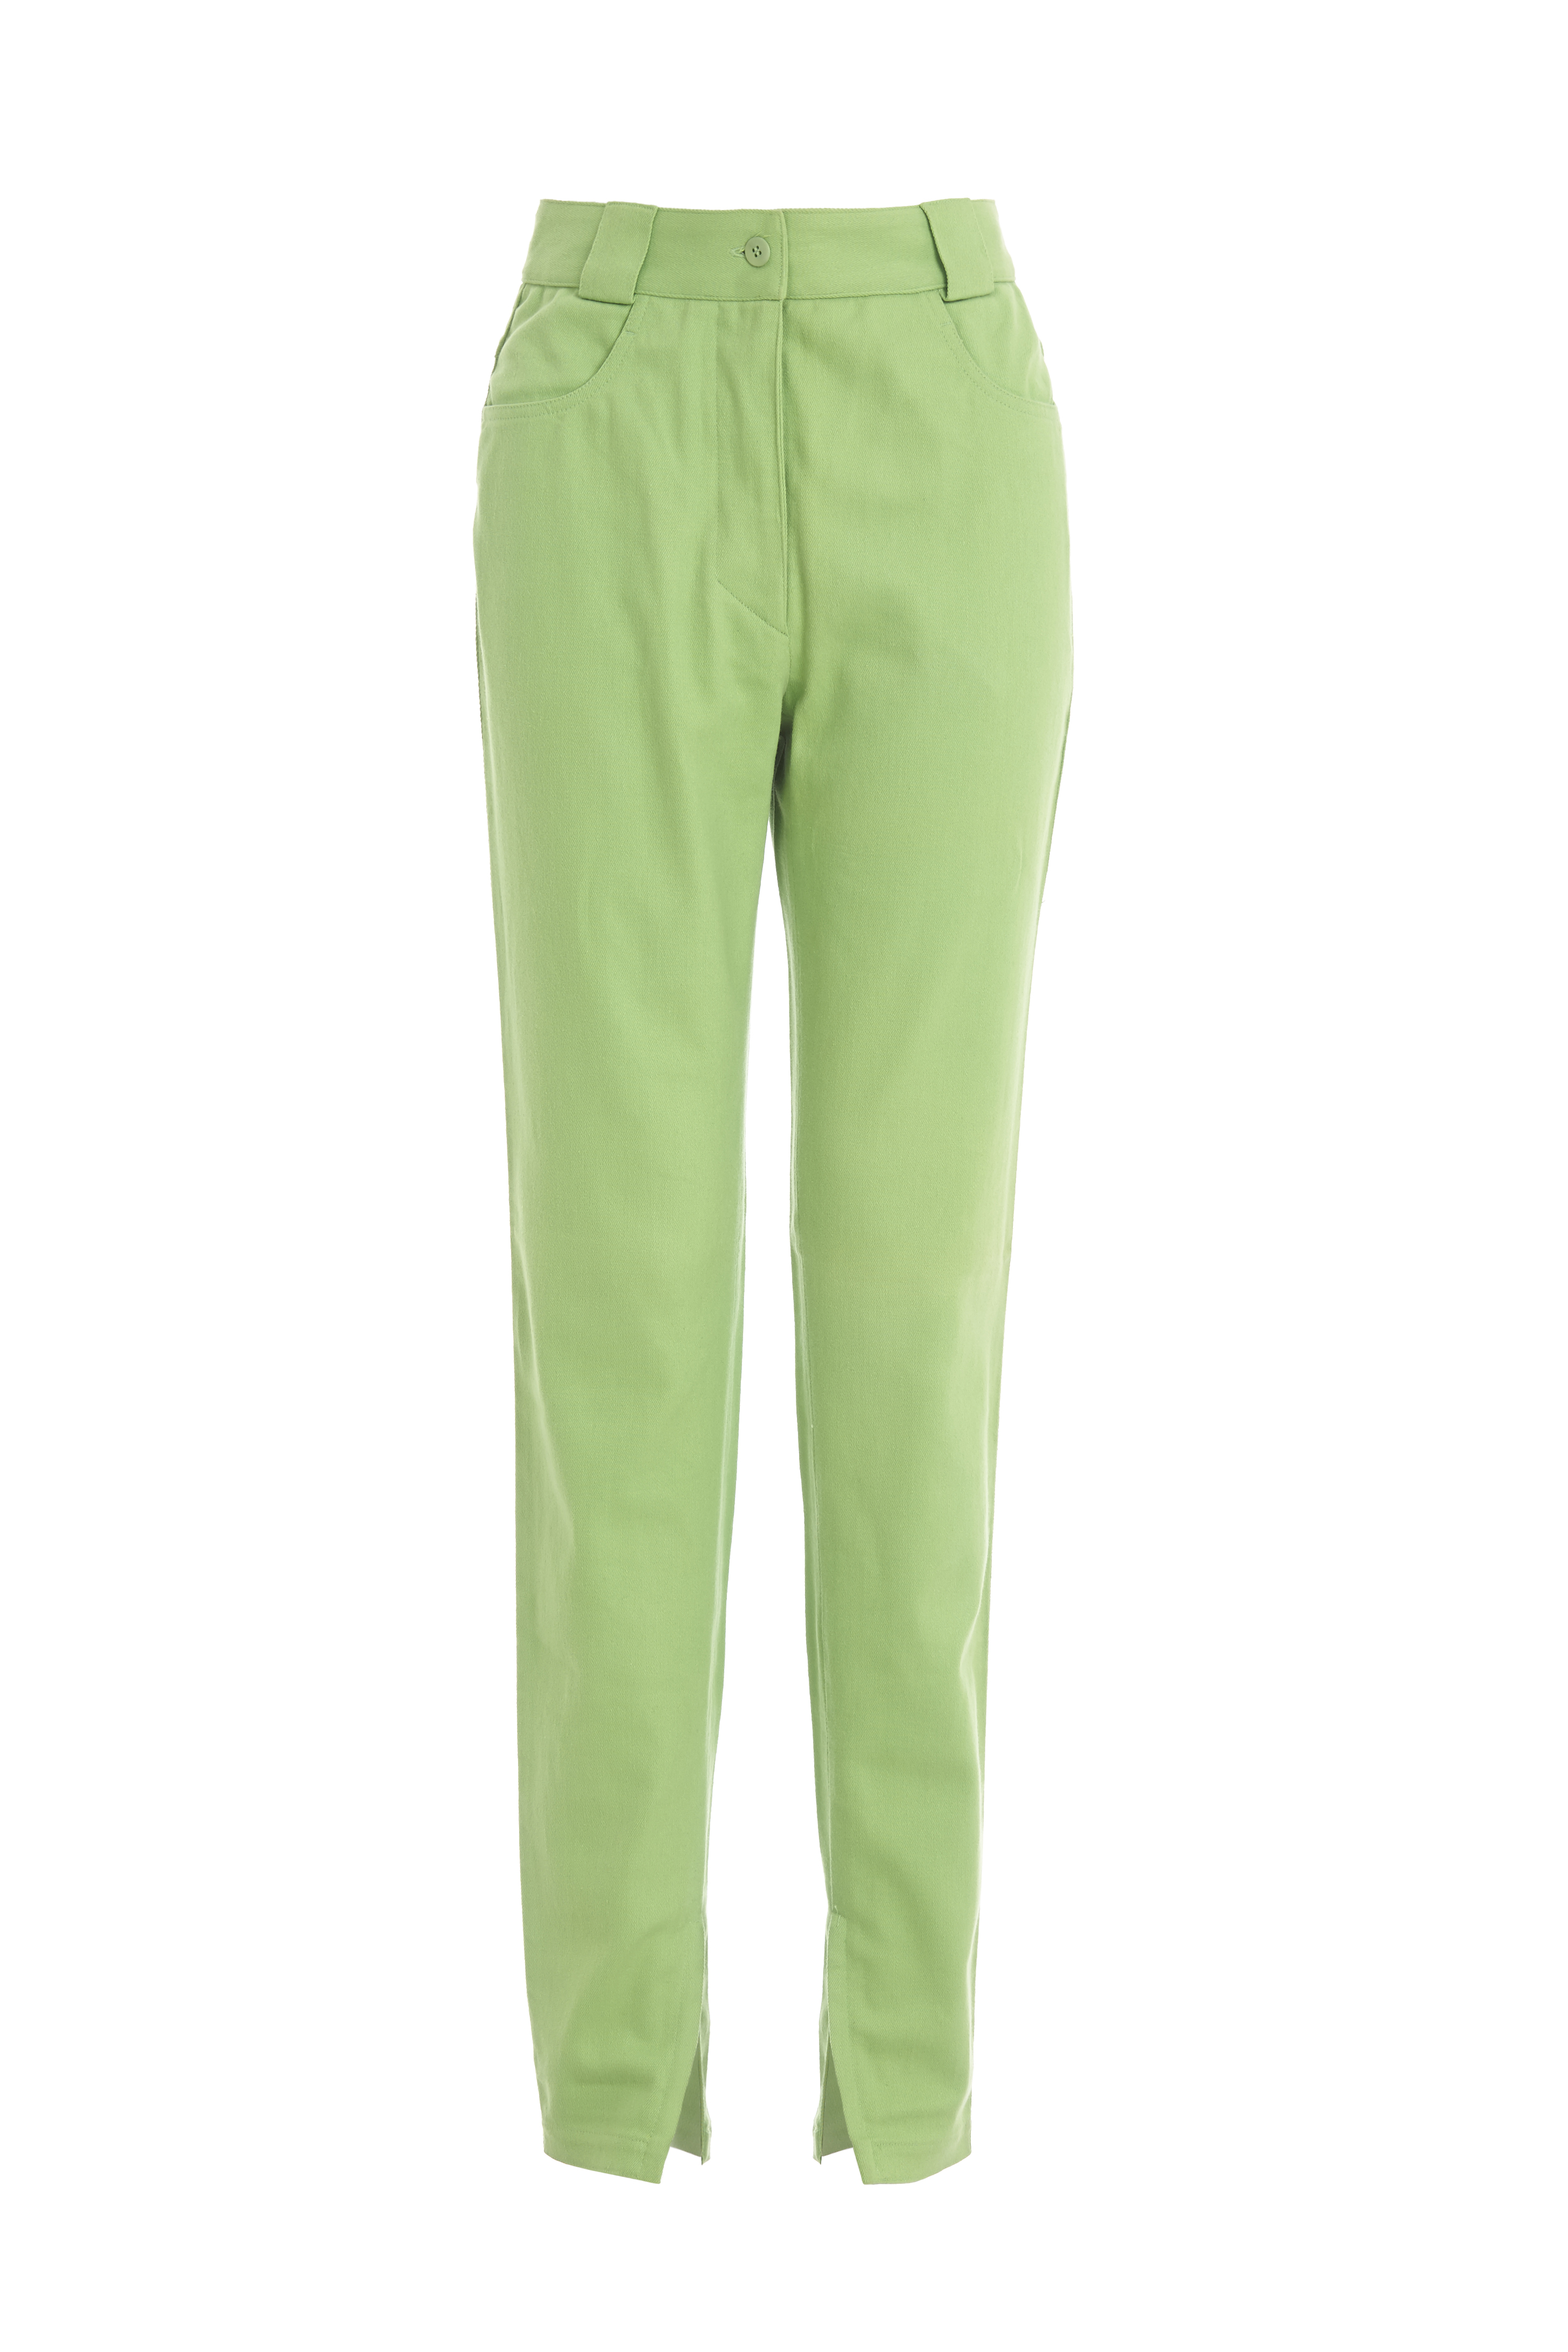 Gianni Versace Couture lime green jeans | Curate8